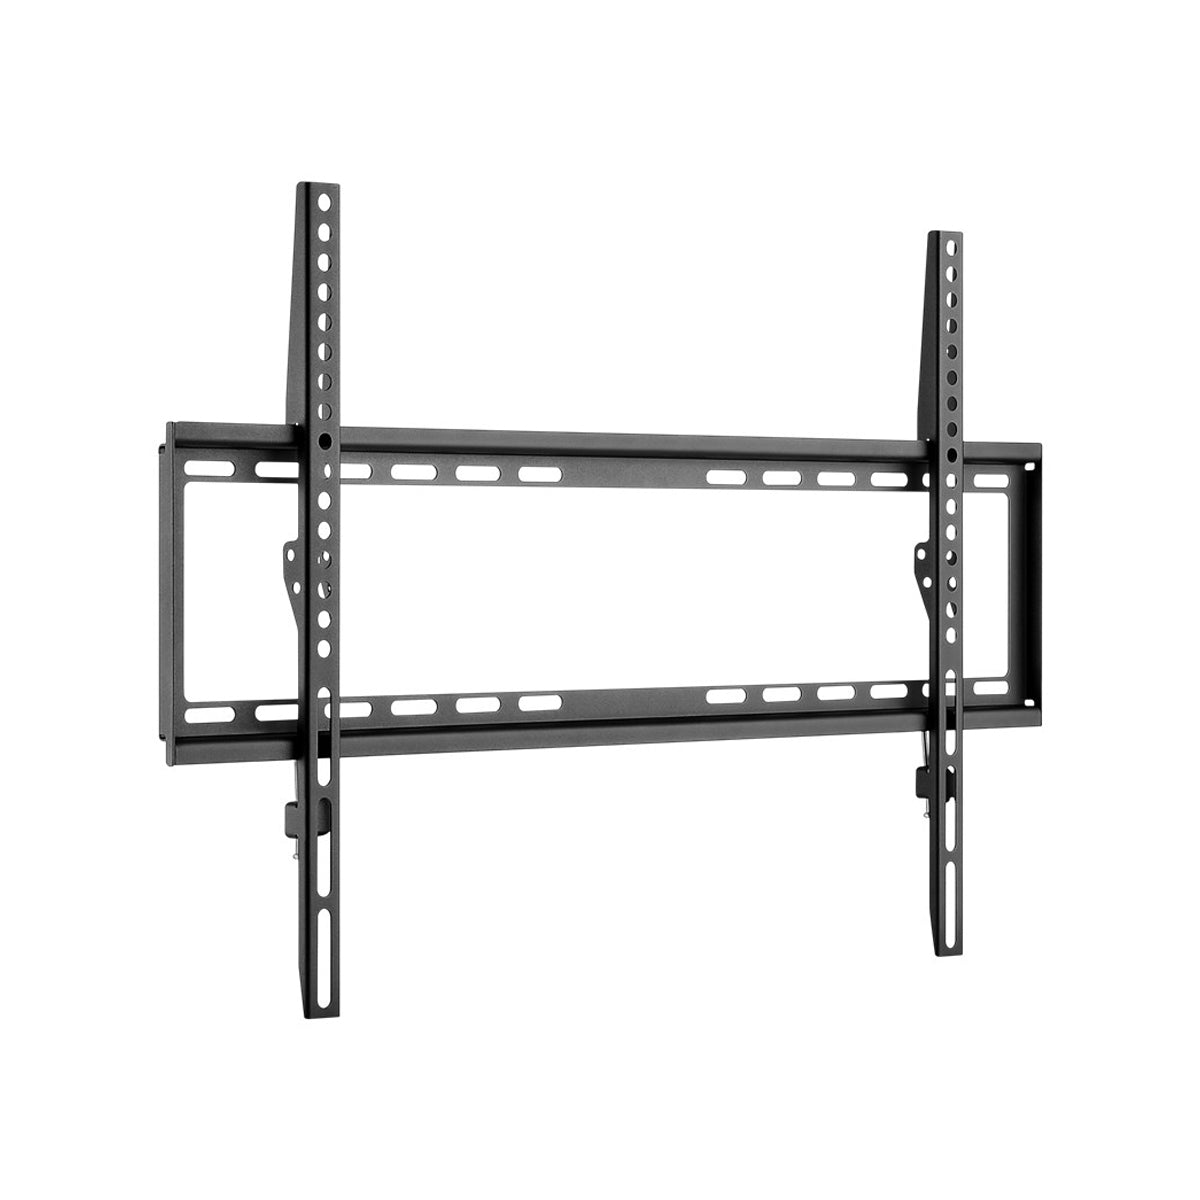 Goobay TV Wall Mount Fixed Position for Large TVs (37-70